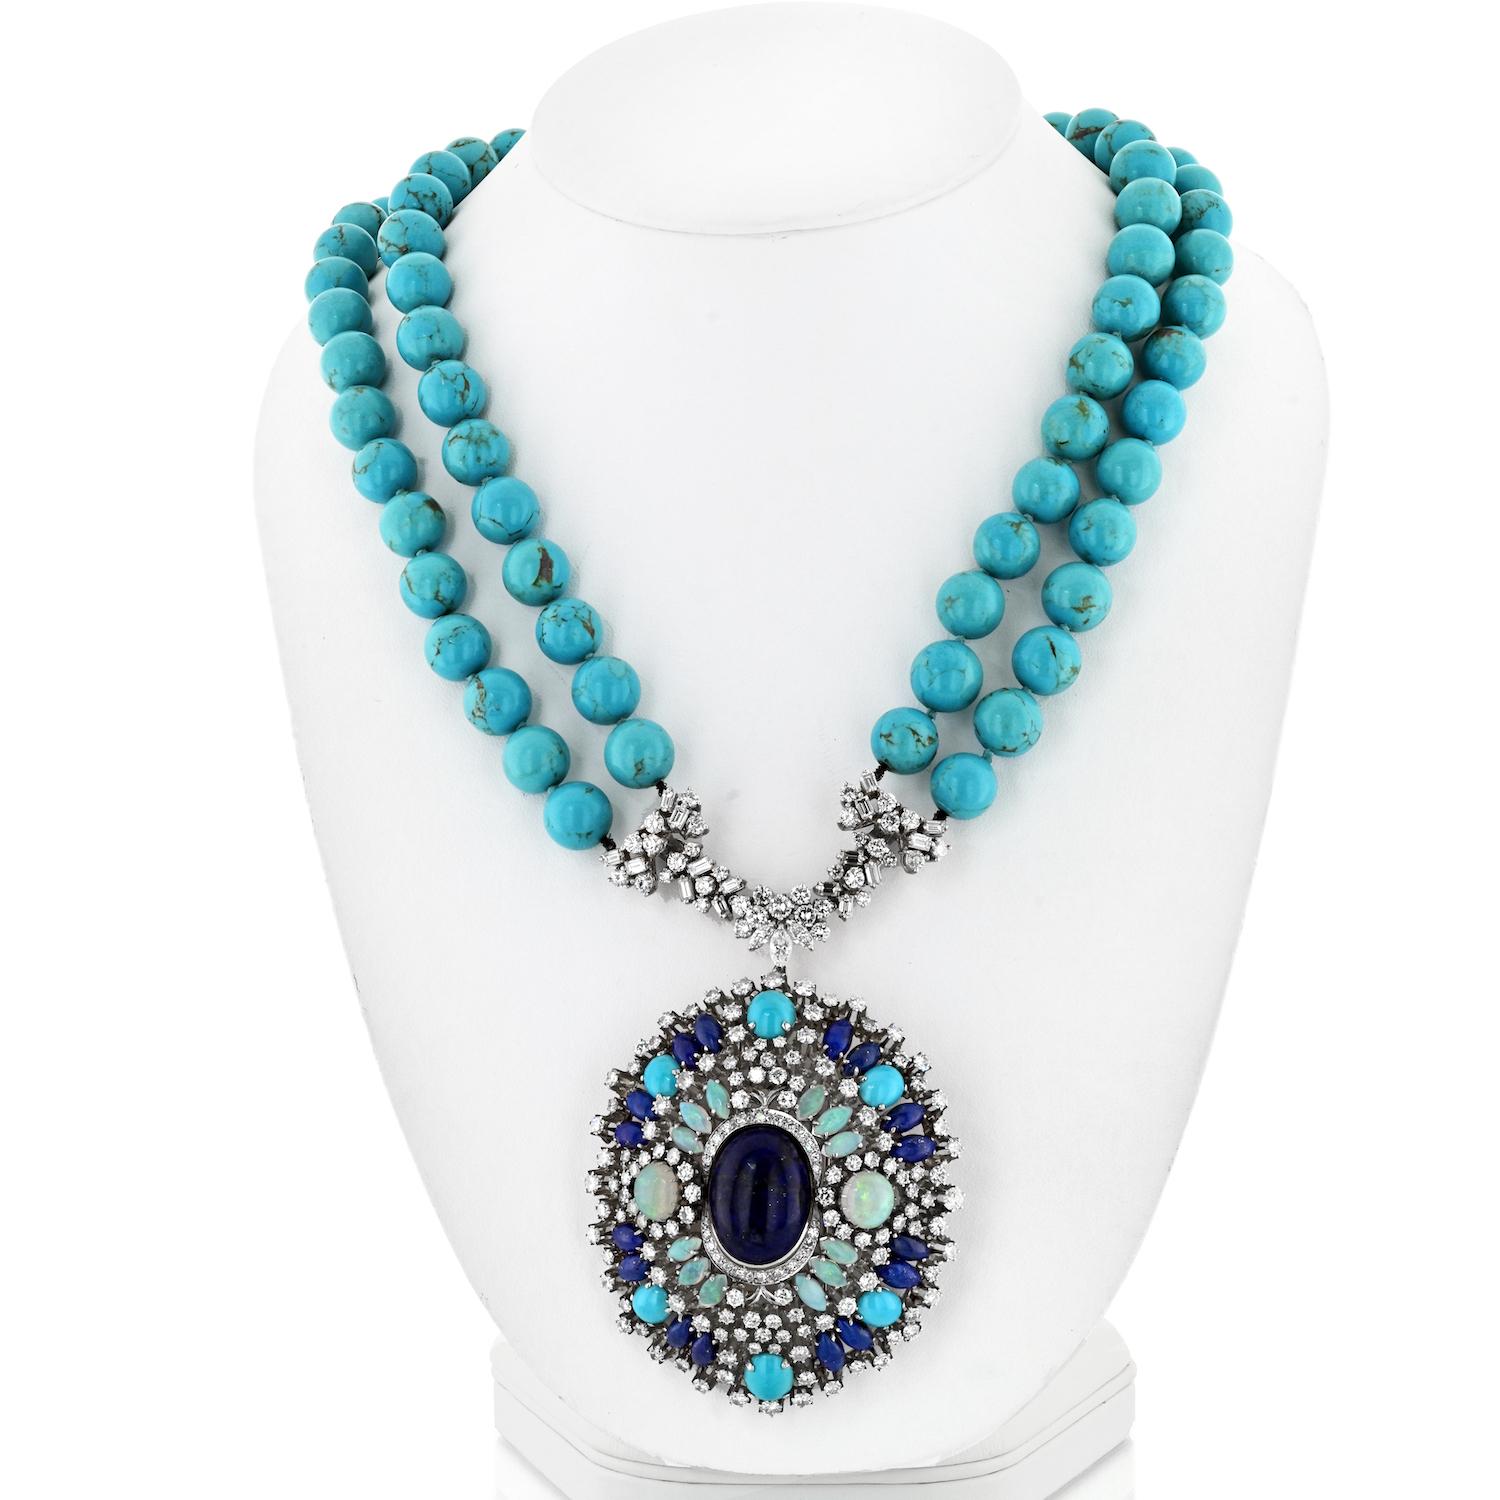 Transport yourself to the free-spirited vibes of the 1970s with this mesmerizing gypsy-style necklace – a boho dream adorned with opals, turquoise, diamonds, and sapphires. This piece is a celebration of diversity and individuality, capturing the